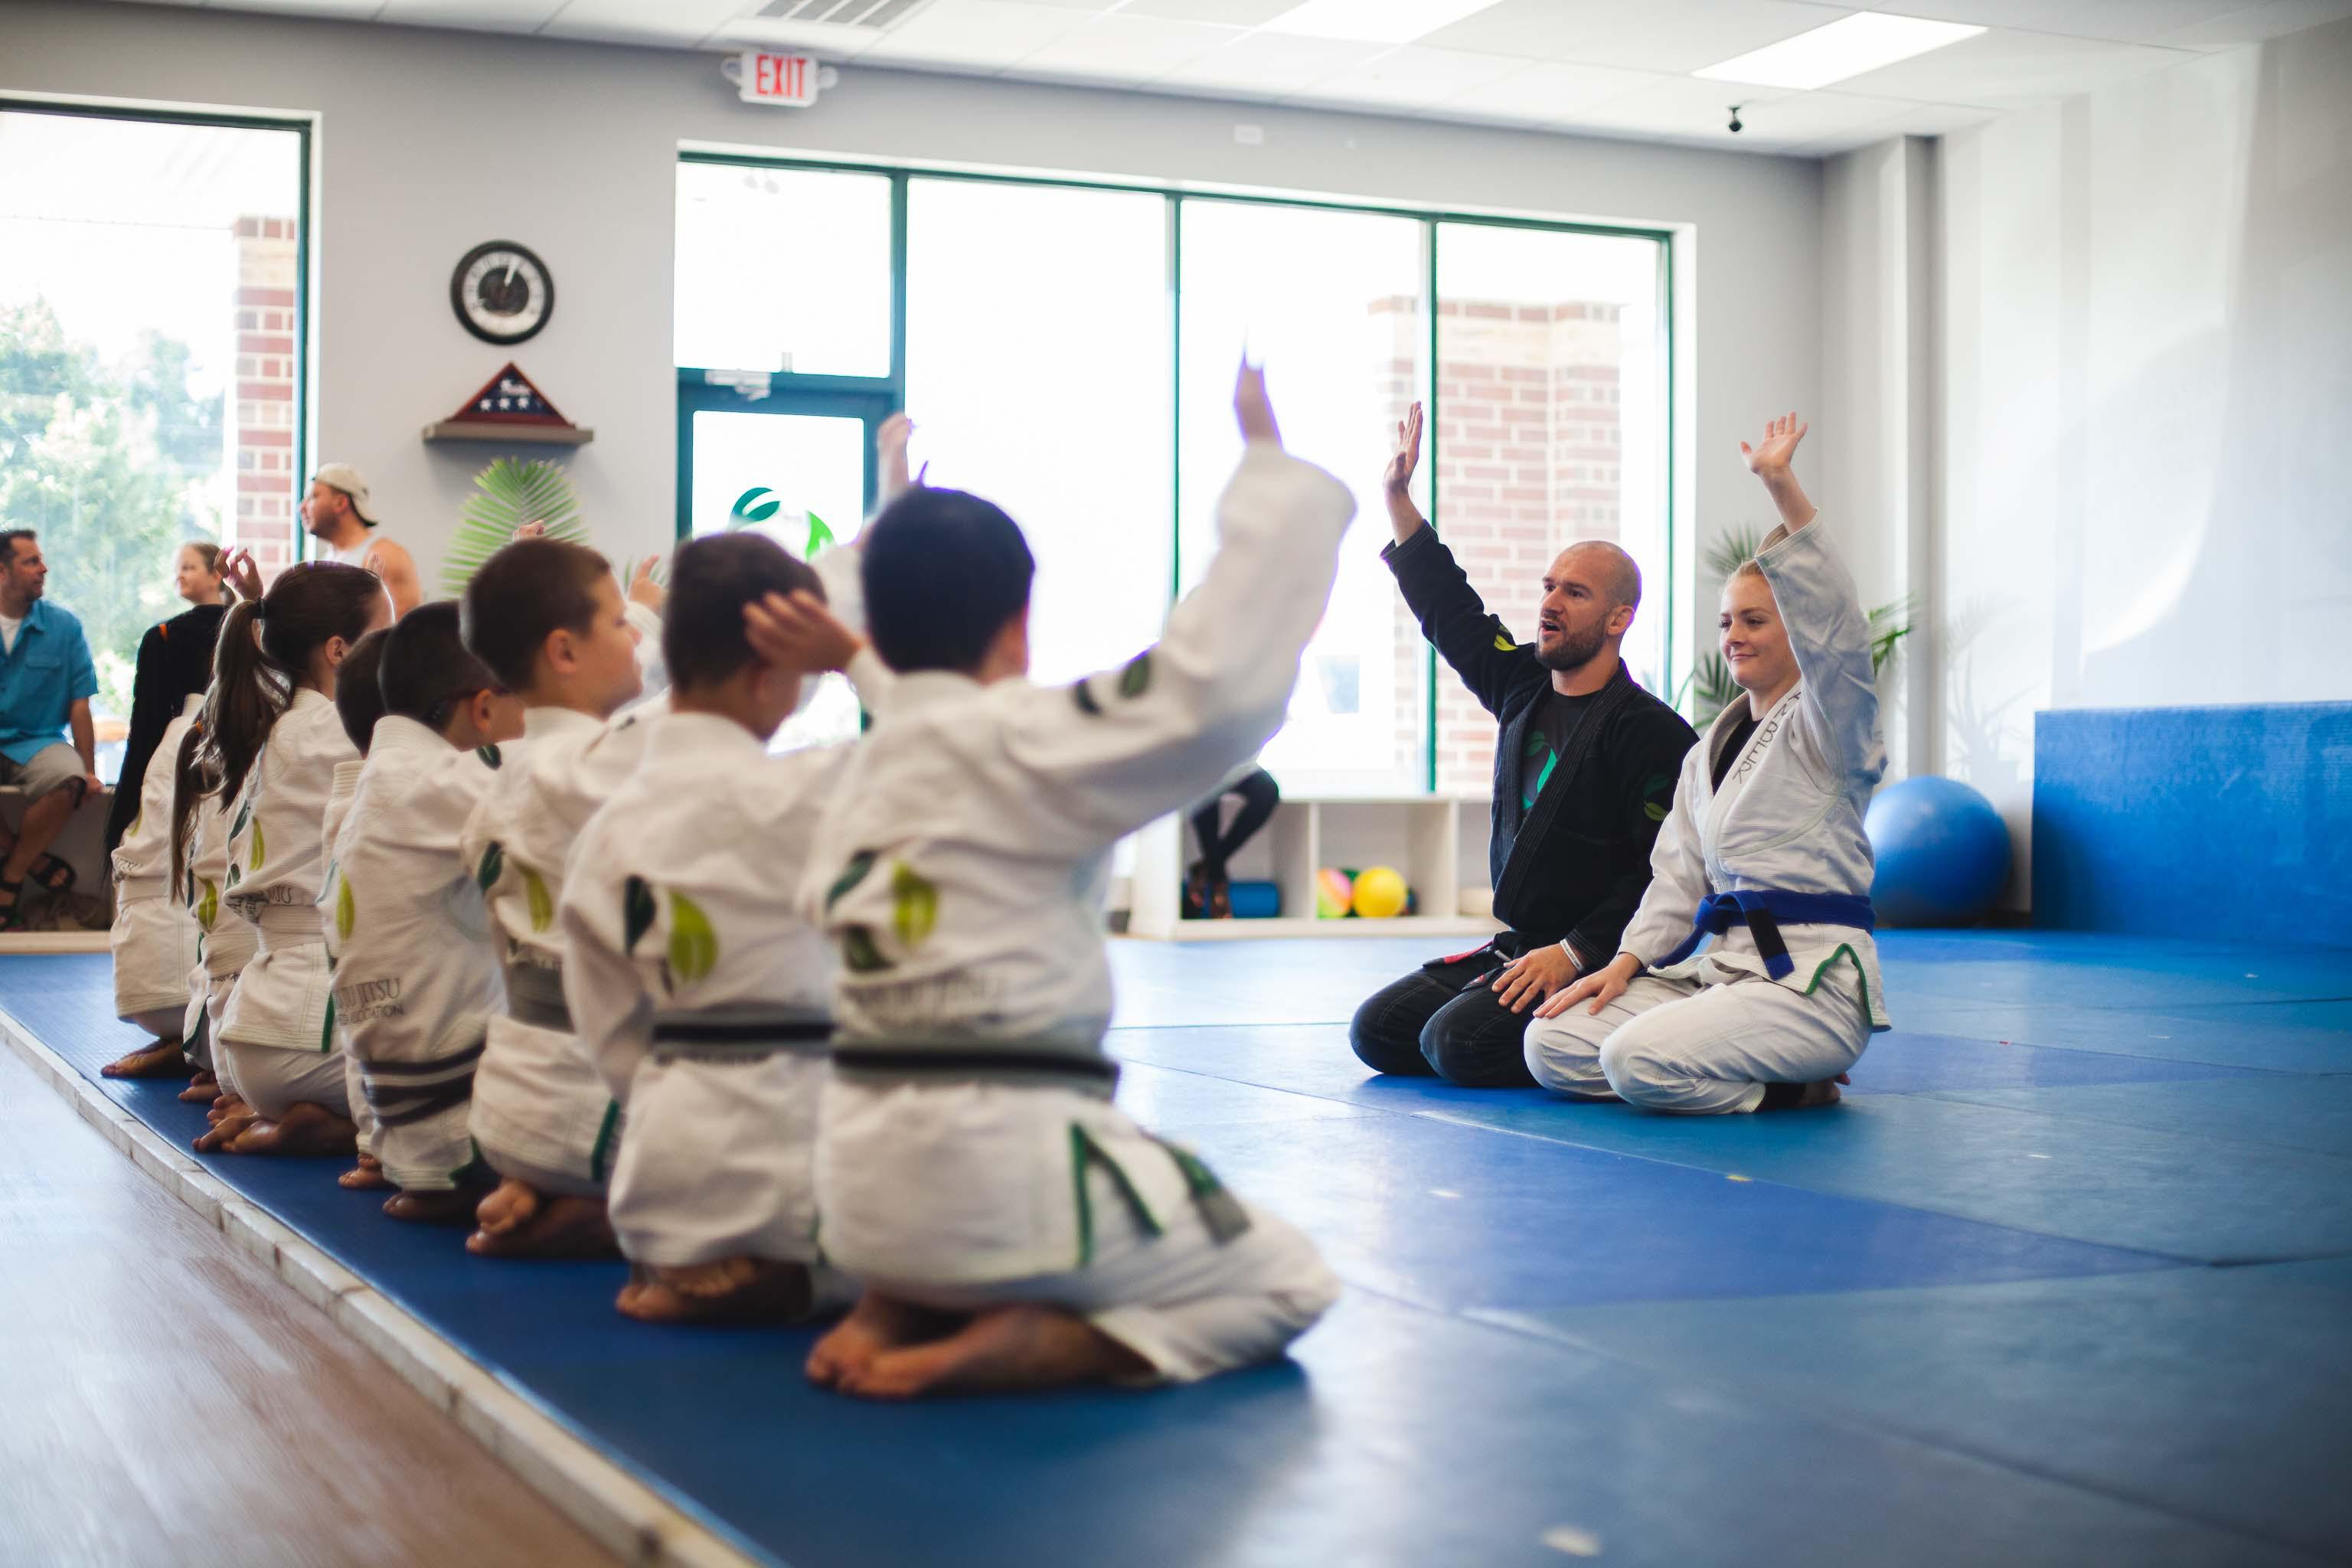 Juniors and Kids Program where students learn how to defend themselves.